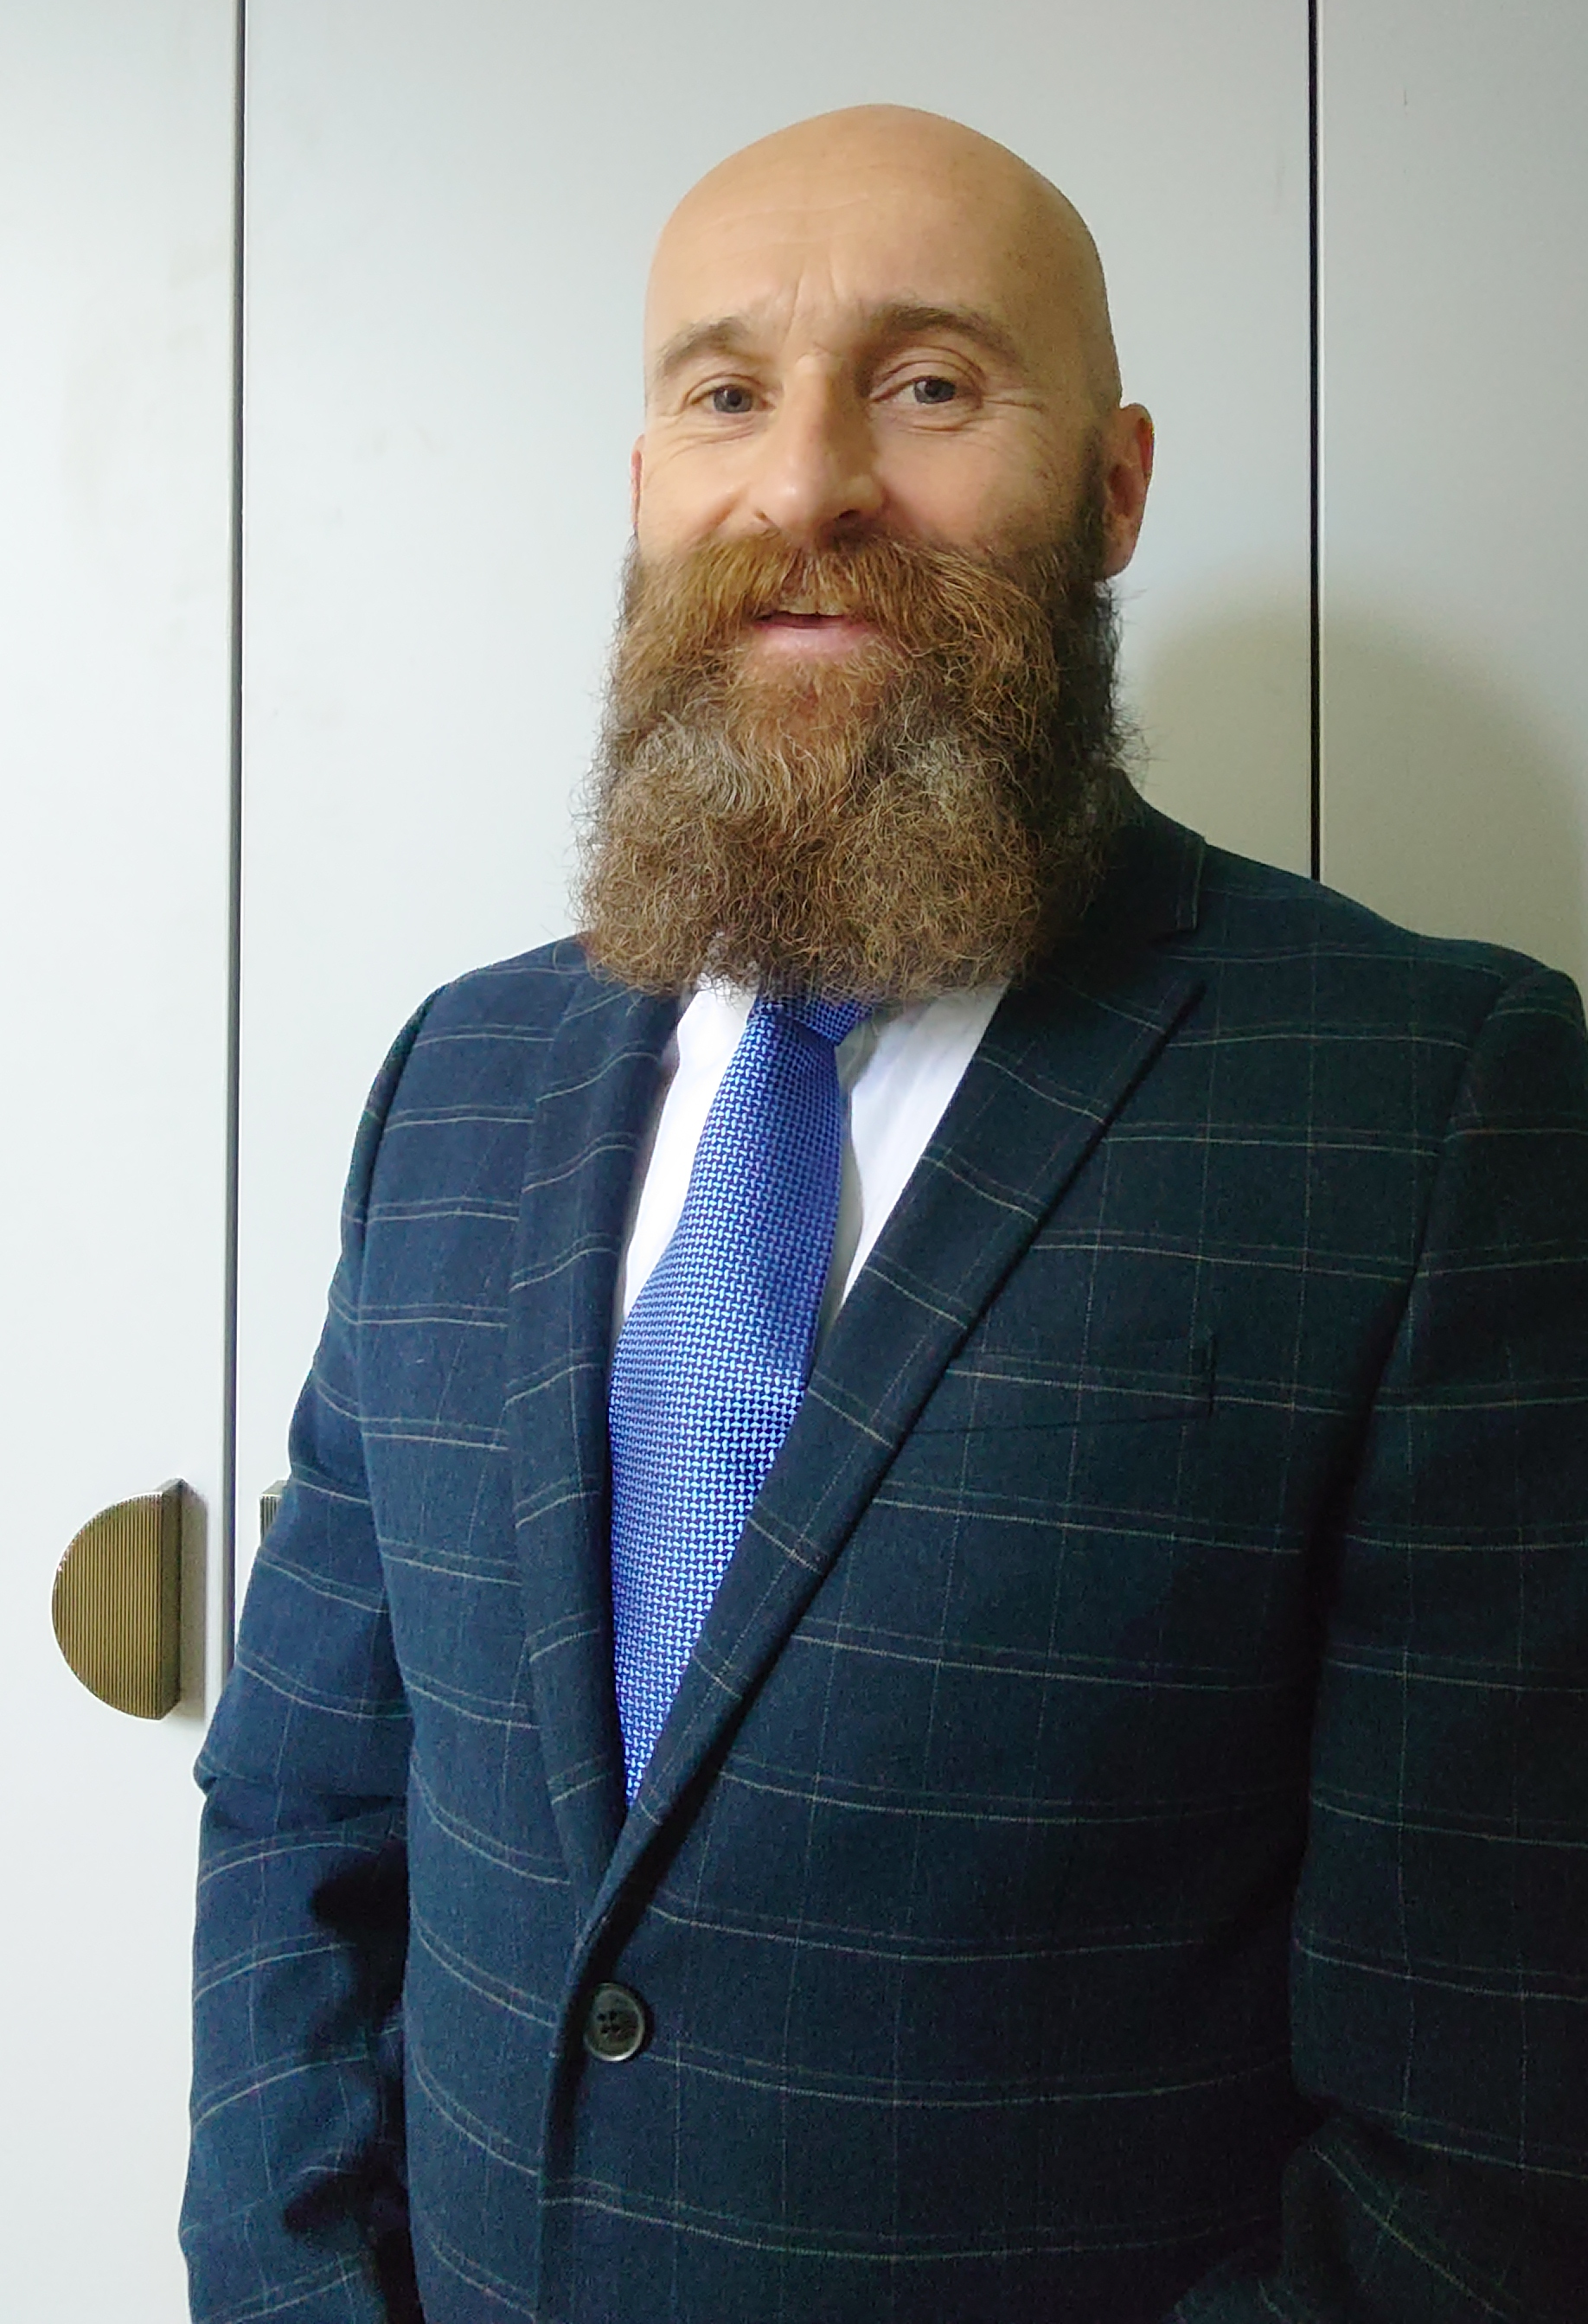 Mark has a beard, is smiling and is wearing a navy checked shirt jacket, a white shirt and a mid-blue tie